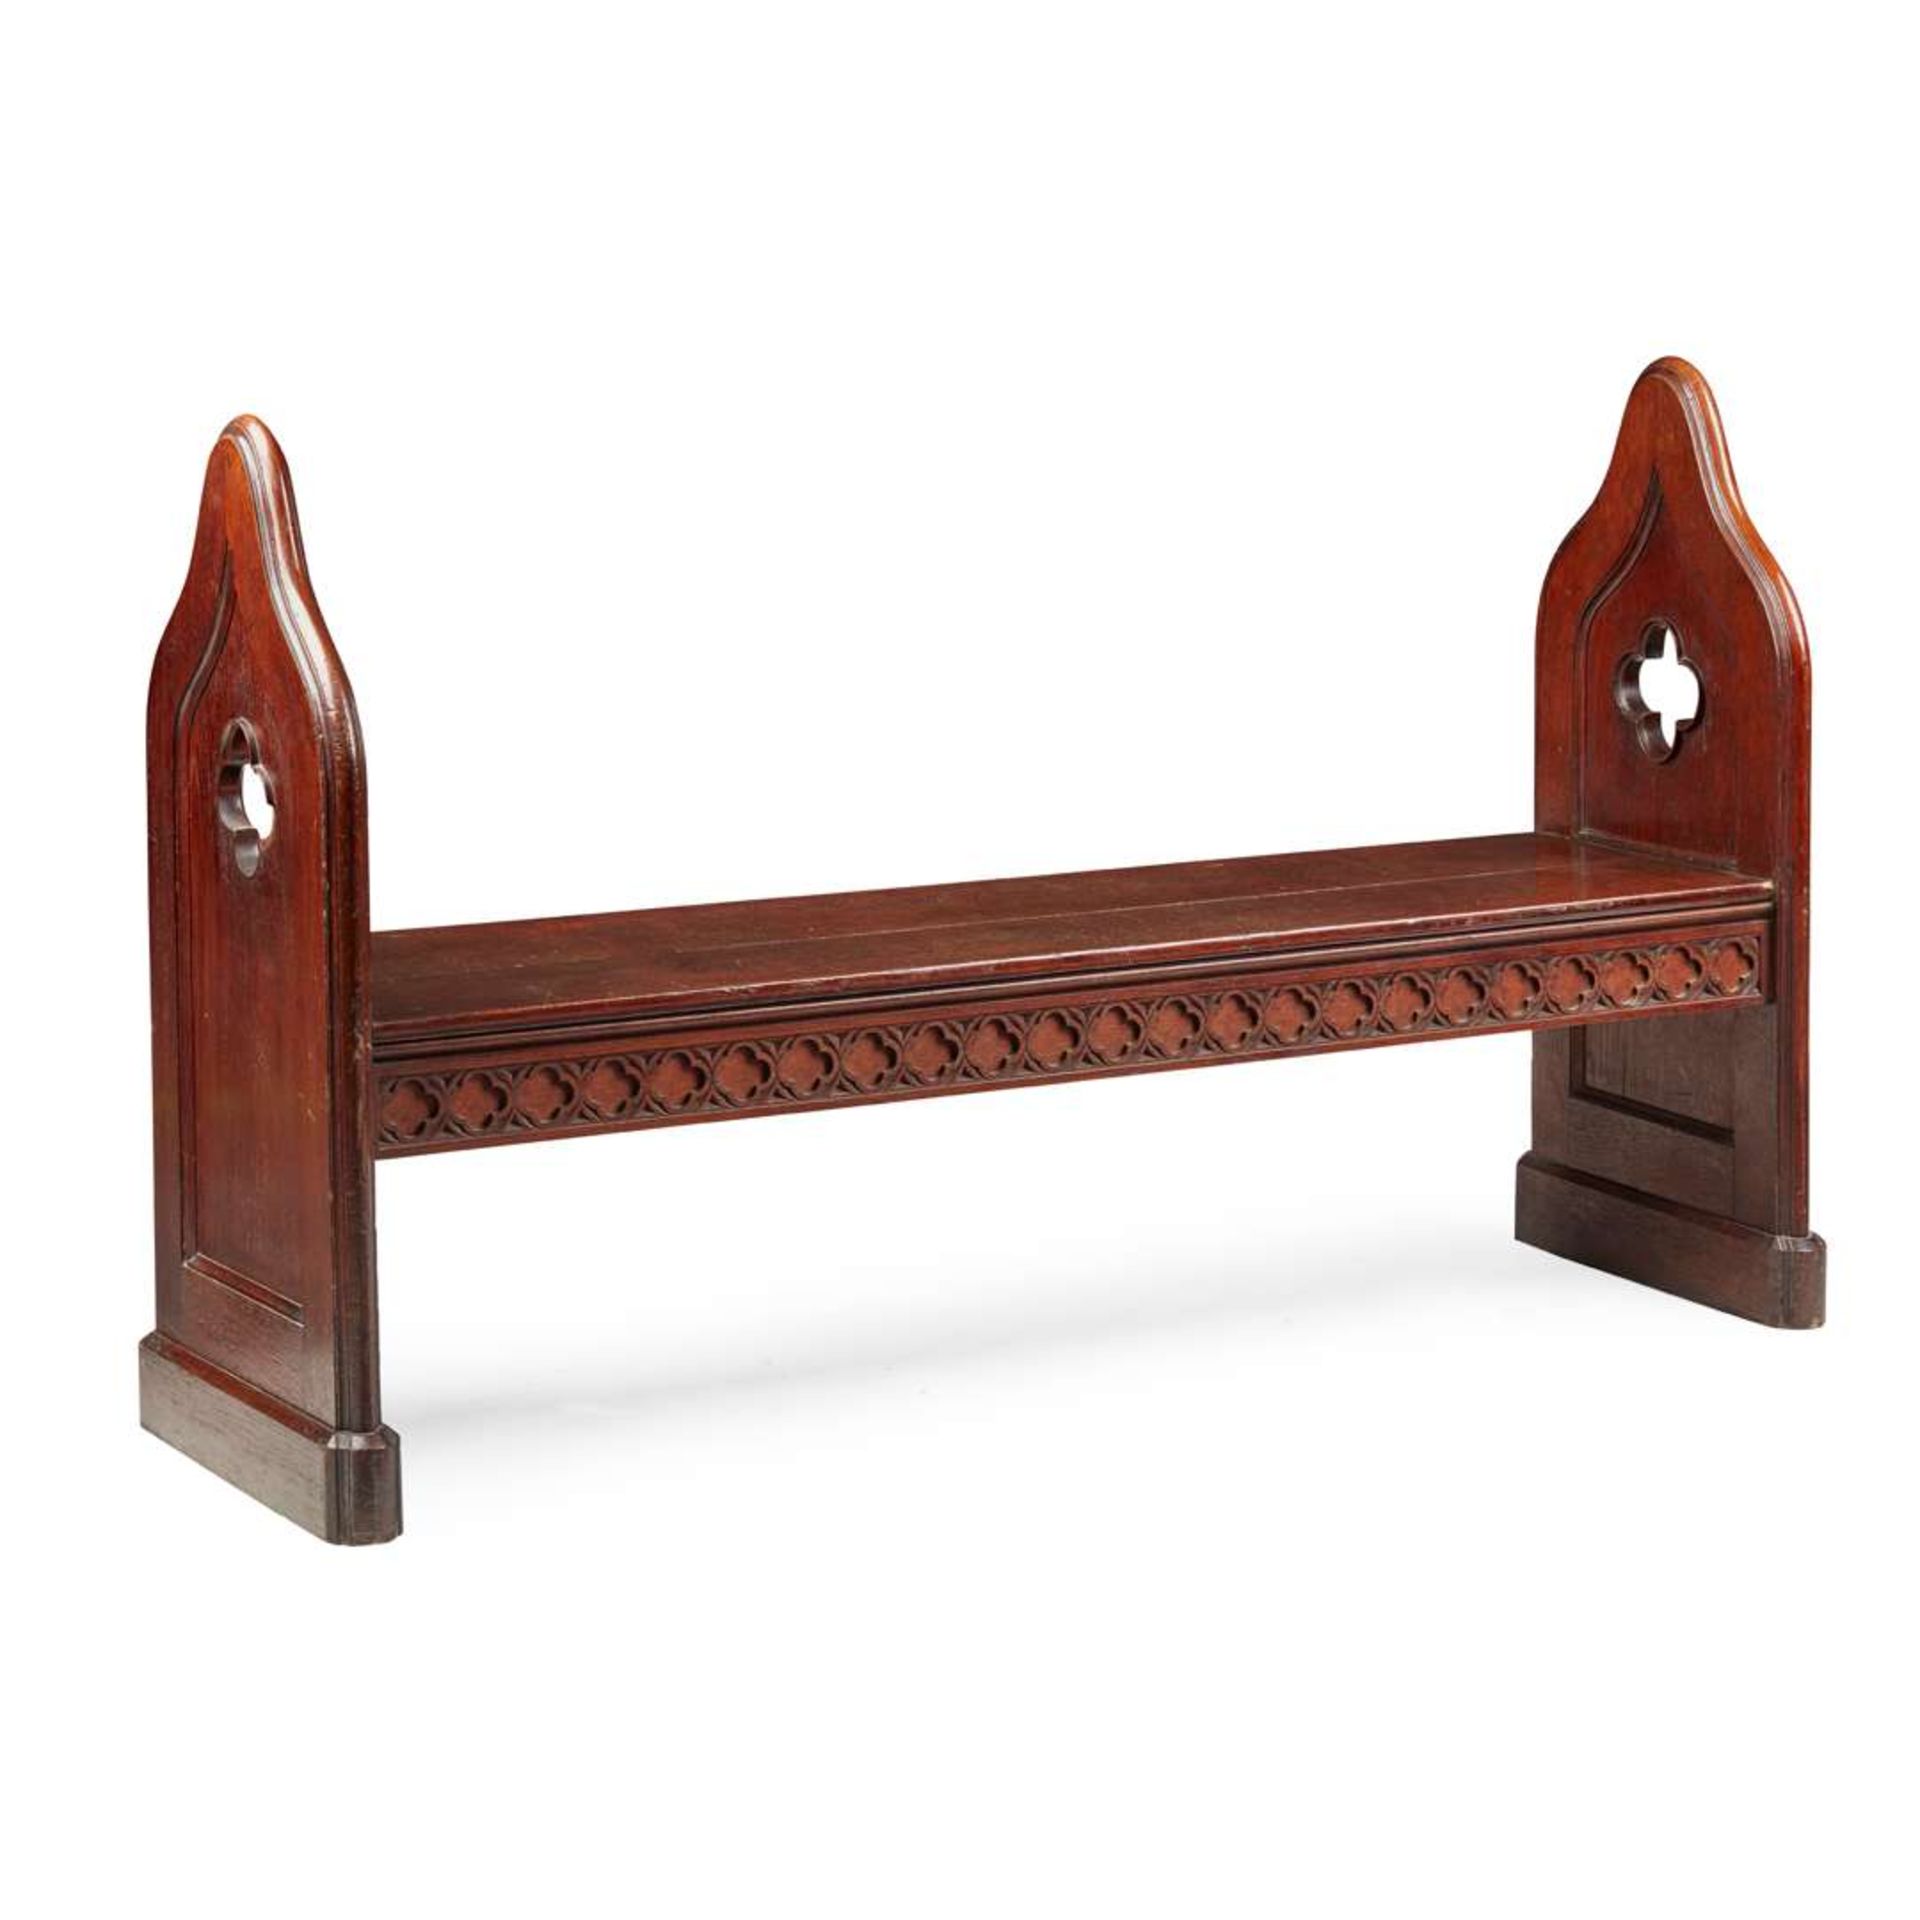 GOTHIC REVIVAL OAK HALL BENCH